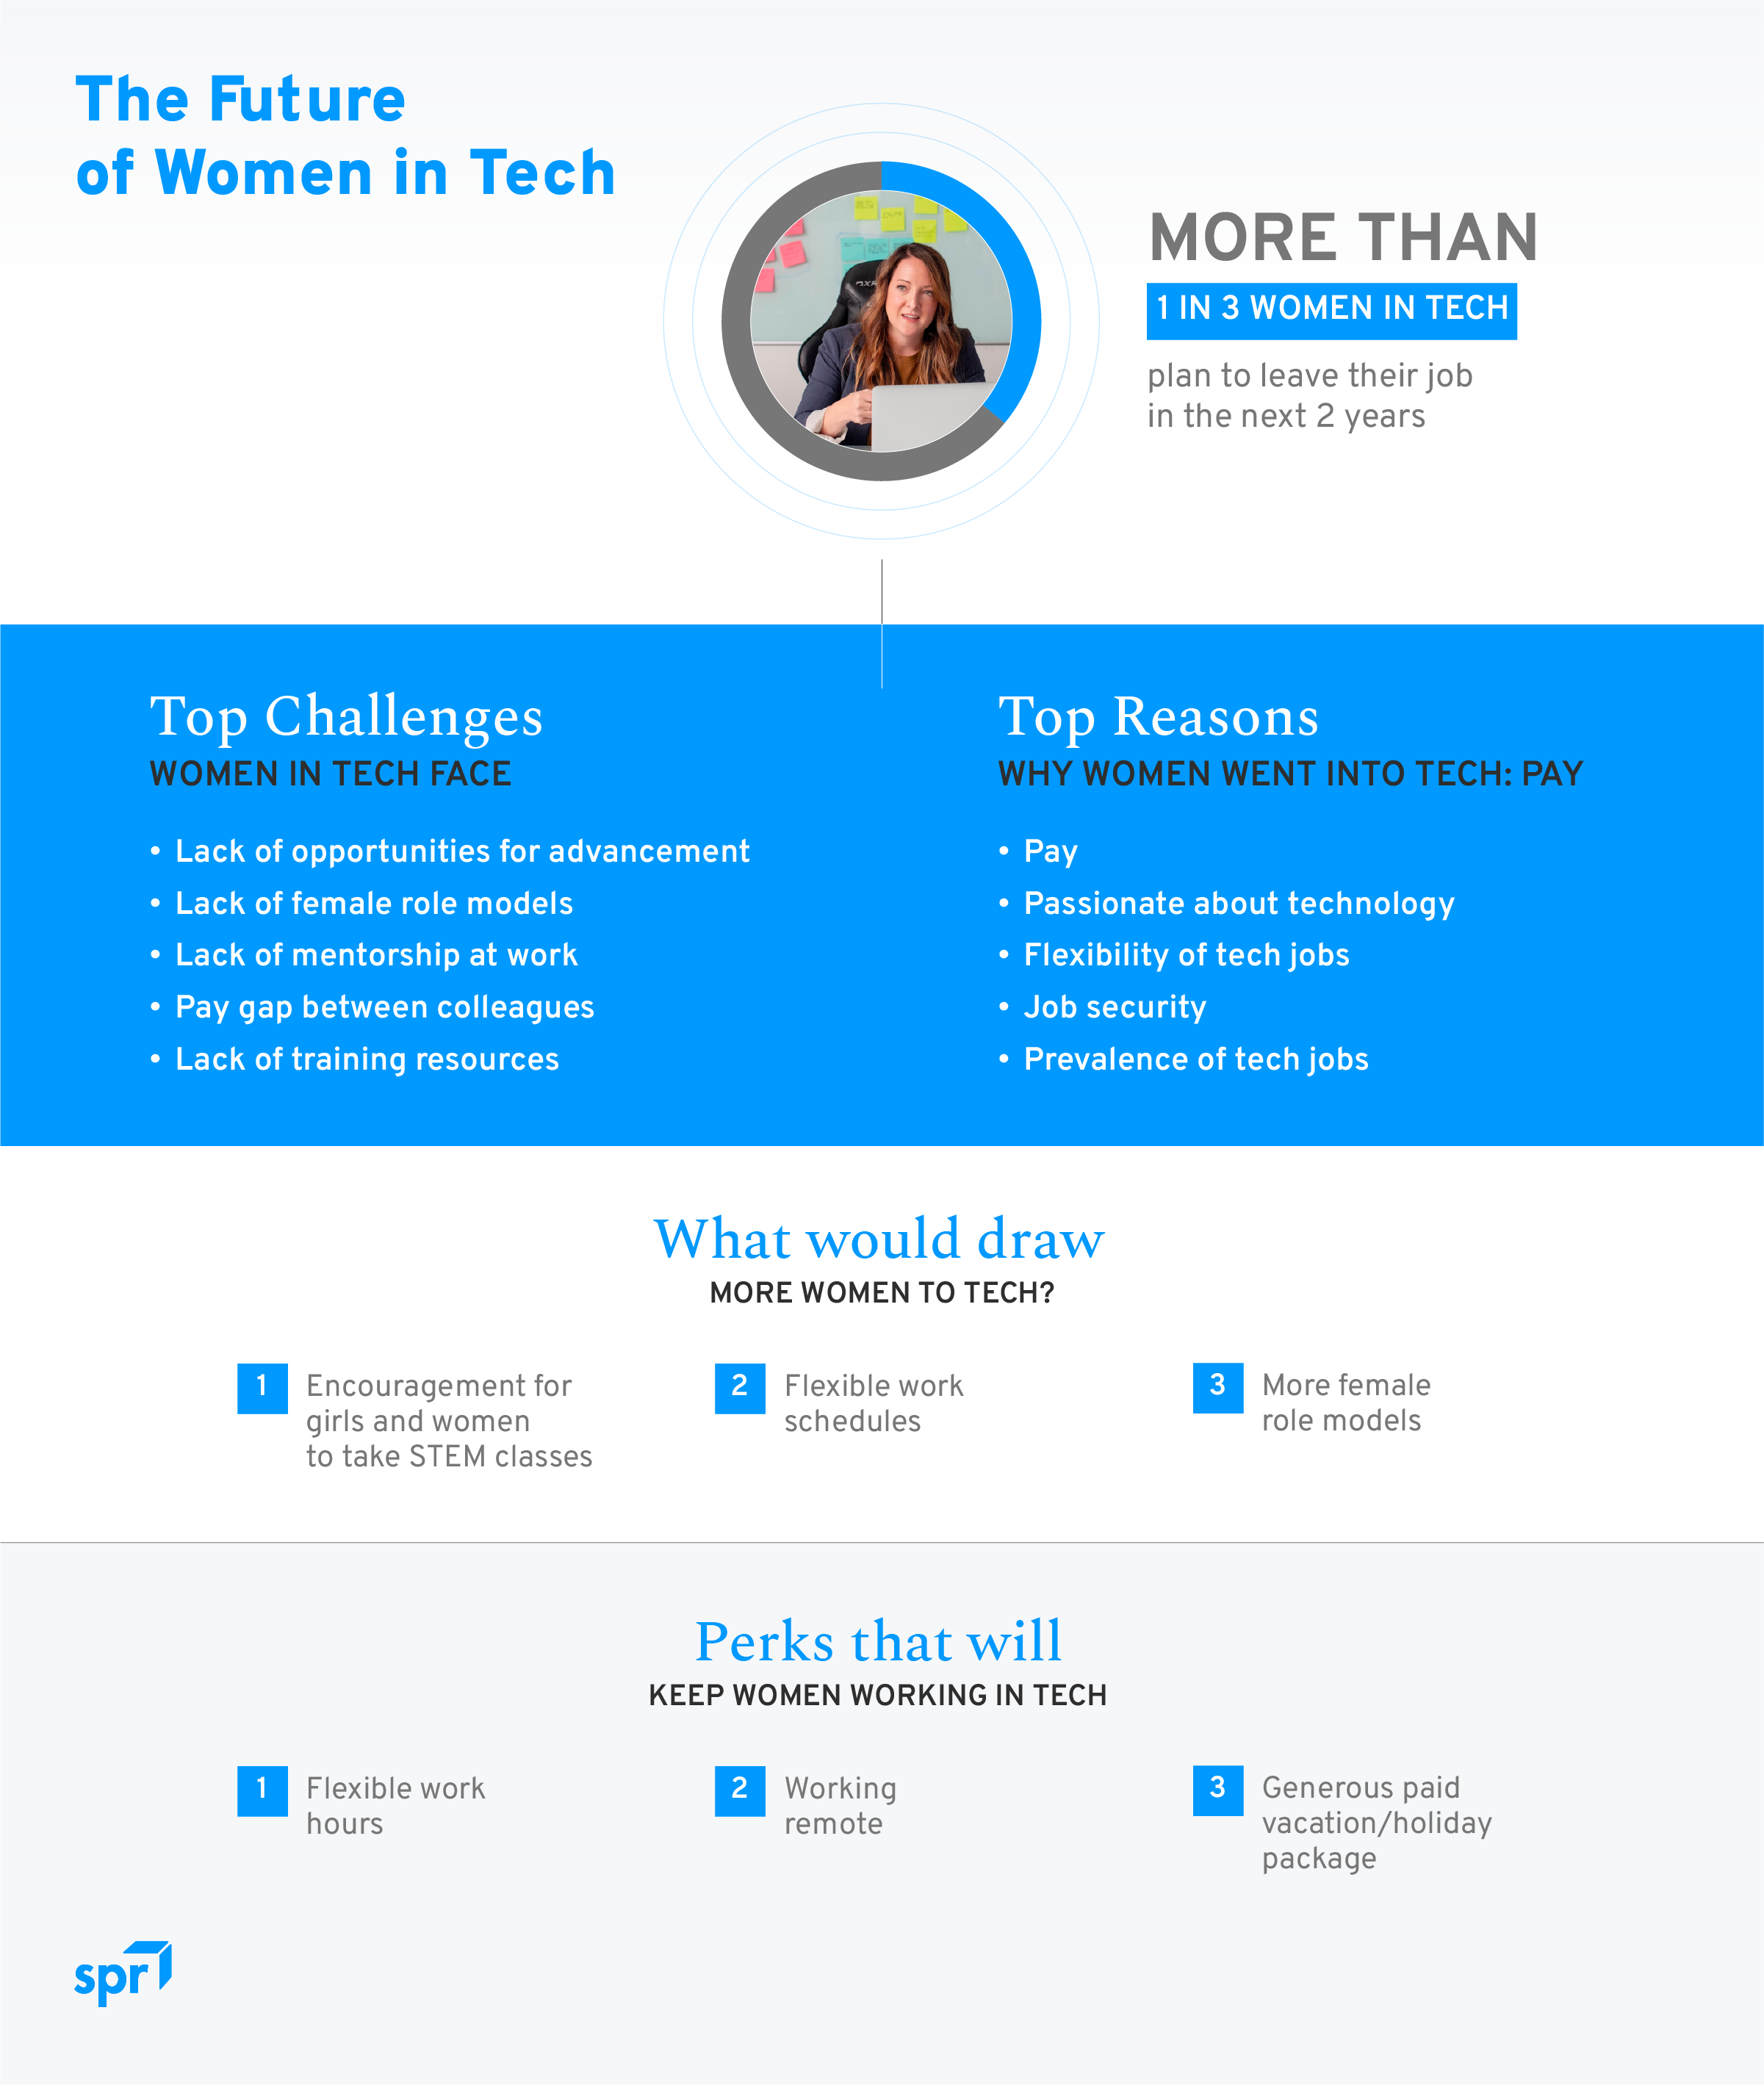 The Future of Women in Tech infographic from spr.com